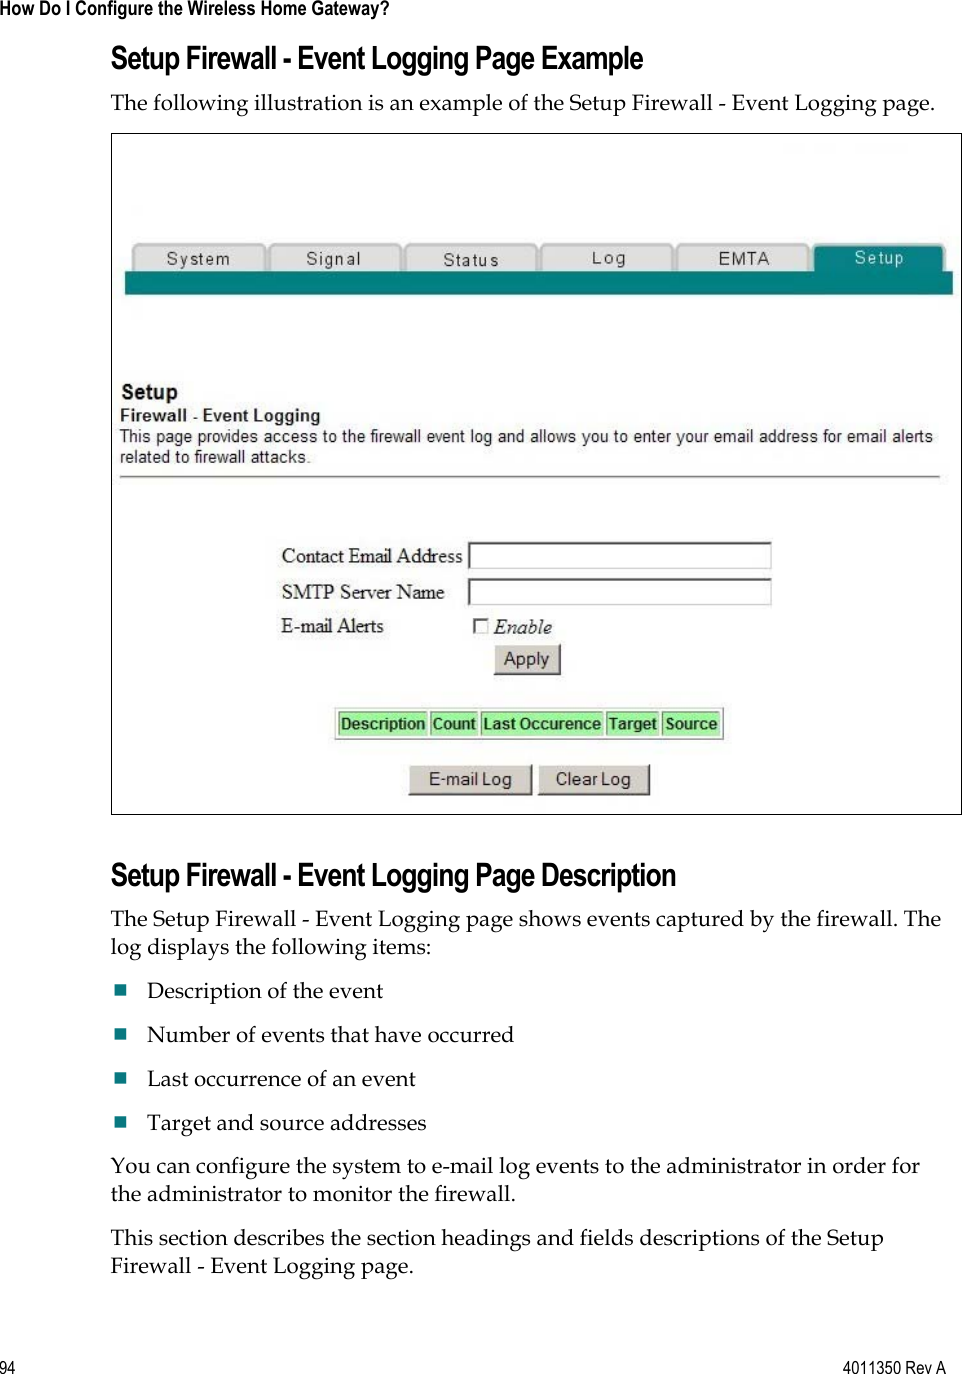 94    4011350 Rev A How Do I Configure the Wireless Home Gateway? Setup Firewall - Event Logging Page Example The following illustration is an example of the Setup Firewall - Event Logging page. Setup Firewall - Event Logging Page Description The Setup Firewall - Event Logging page shows events captured by the firewall. The log displays the following items: Description of the event Number of events that have occurred Last occurrence of an event Target and source addresses You can configure the system to e-mail log events to the administrator in order for the administrator to monitor the firewall. This section describes the section headings and fields descriptions of the Setup Firewall - Event Logging page. 